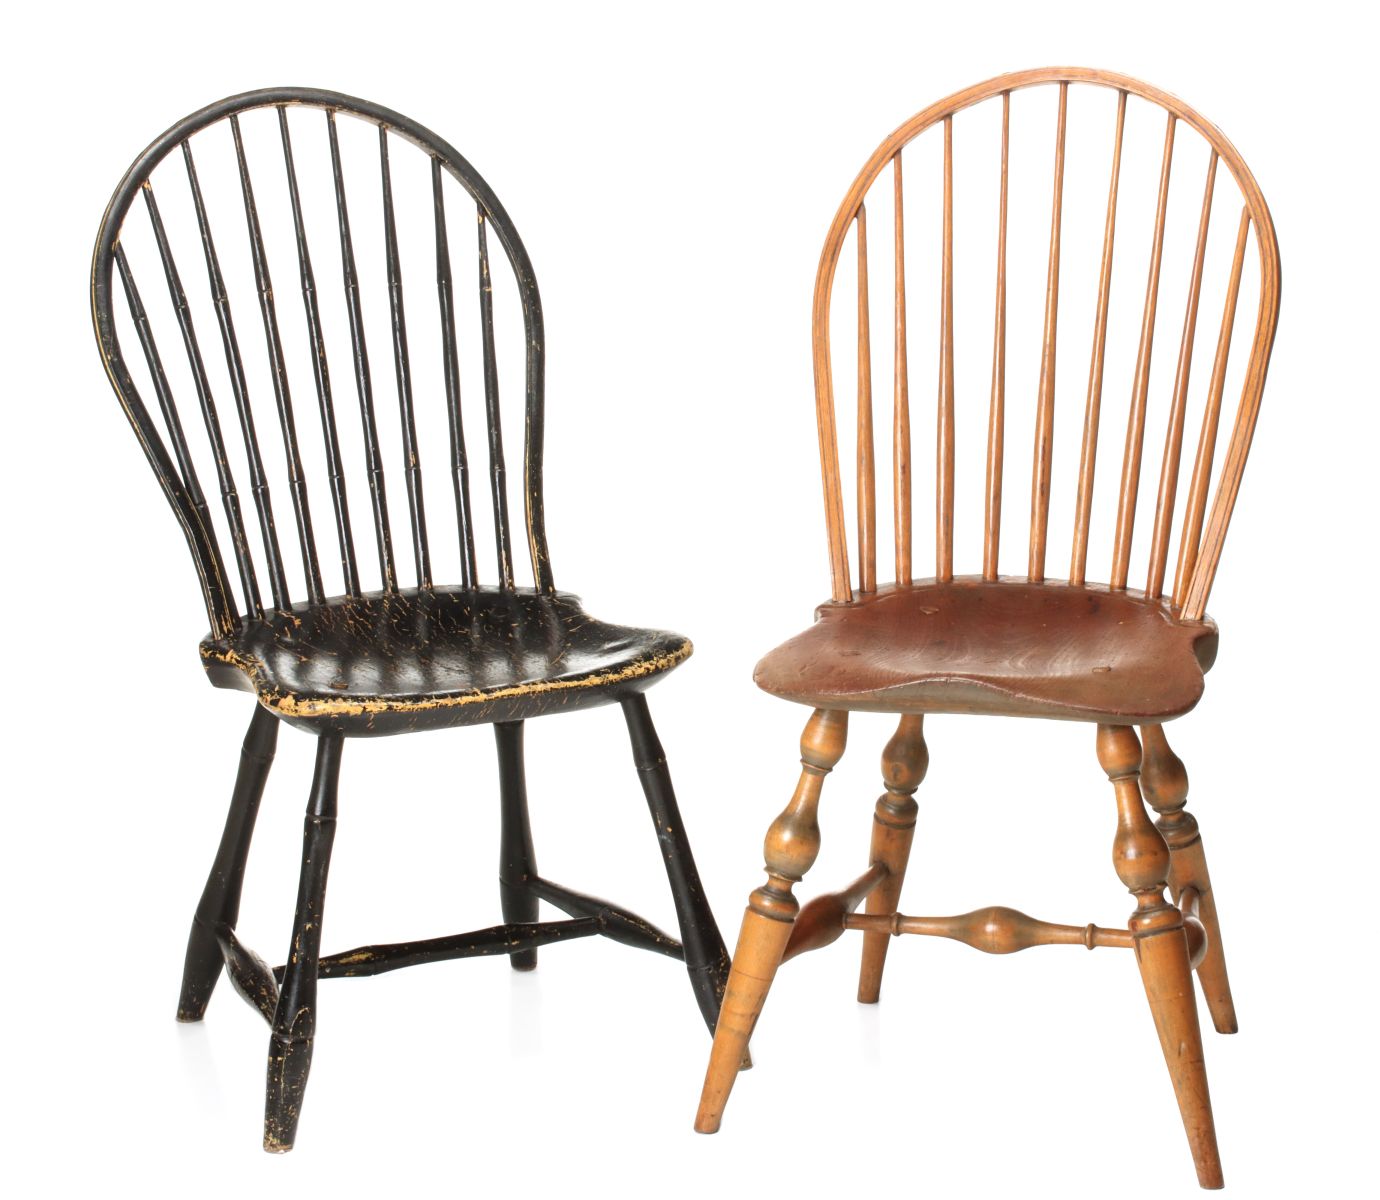 TWO 18TH CENTURY BOW BACK WINDSOR CHAIRS